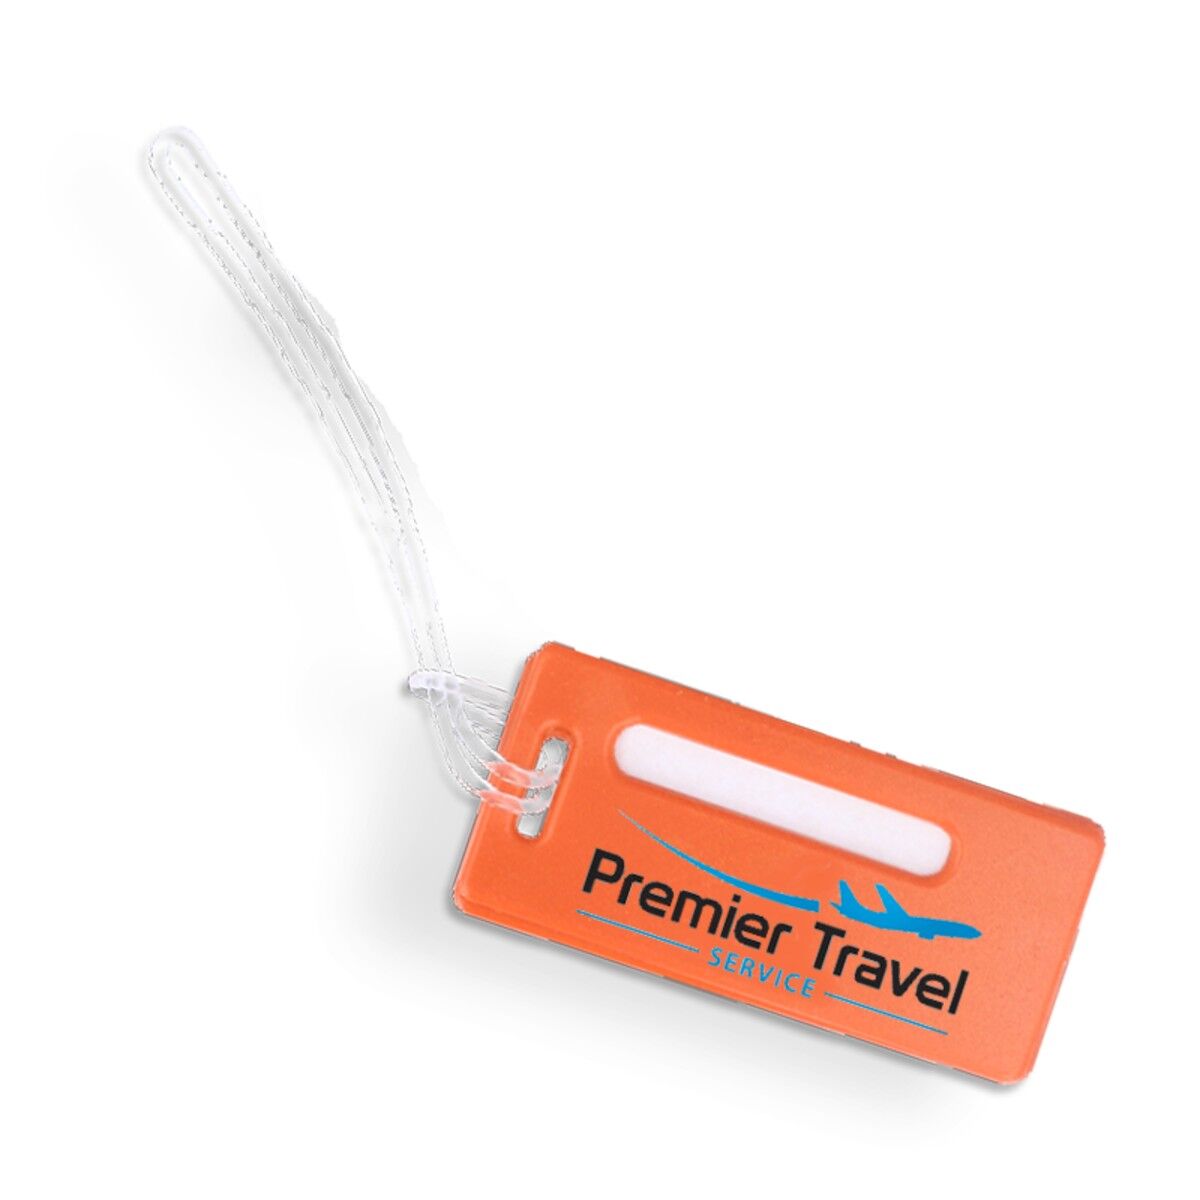 UK Made Recycled Luggage Tags